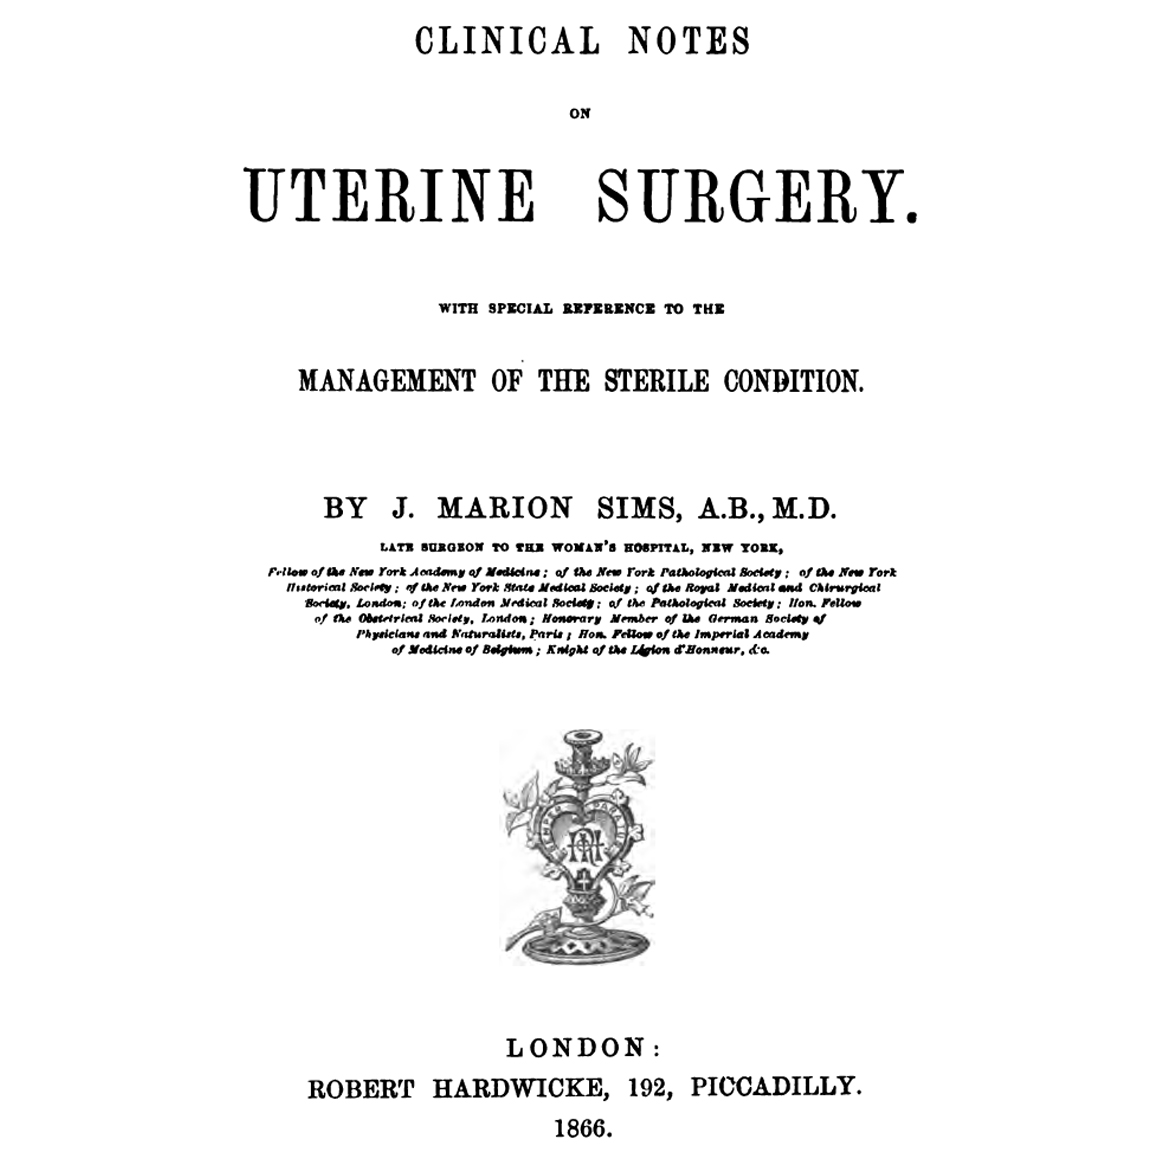 1866-SIMS-Clini-notes-uterine-surgery-title